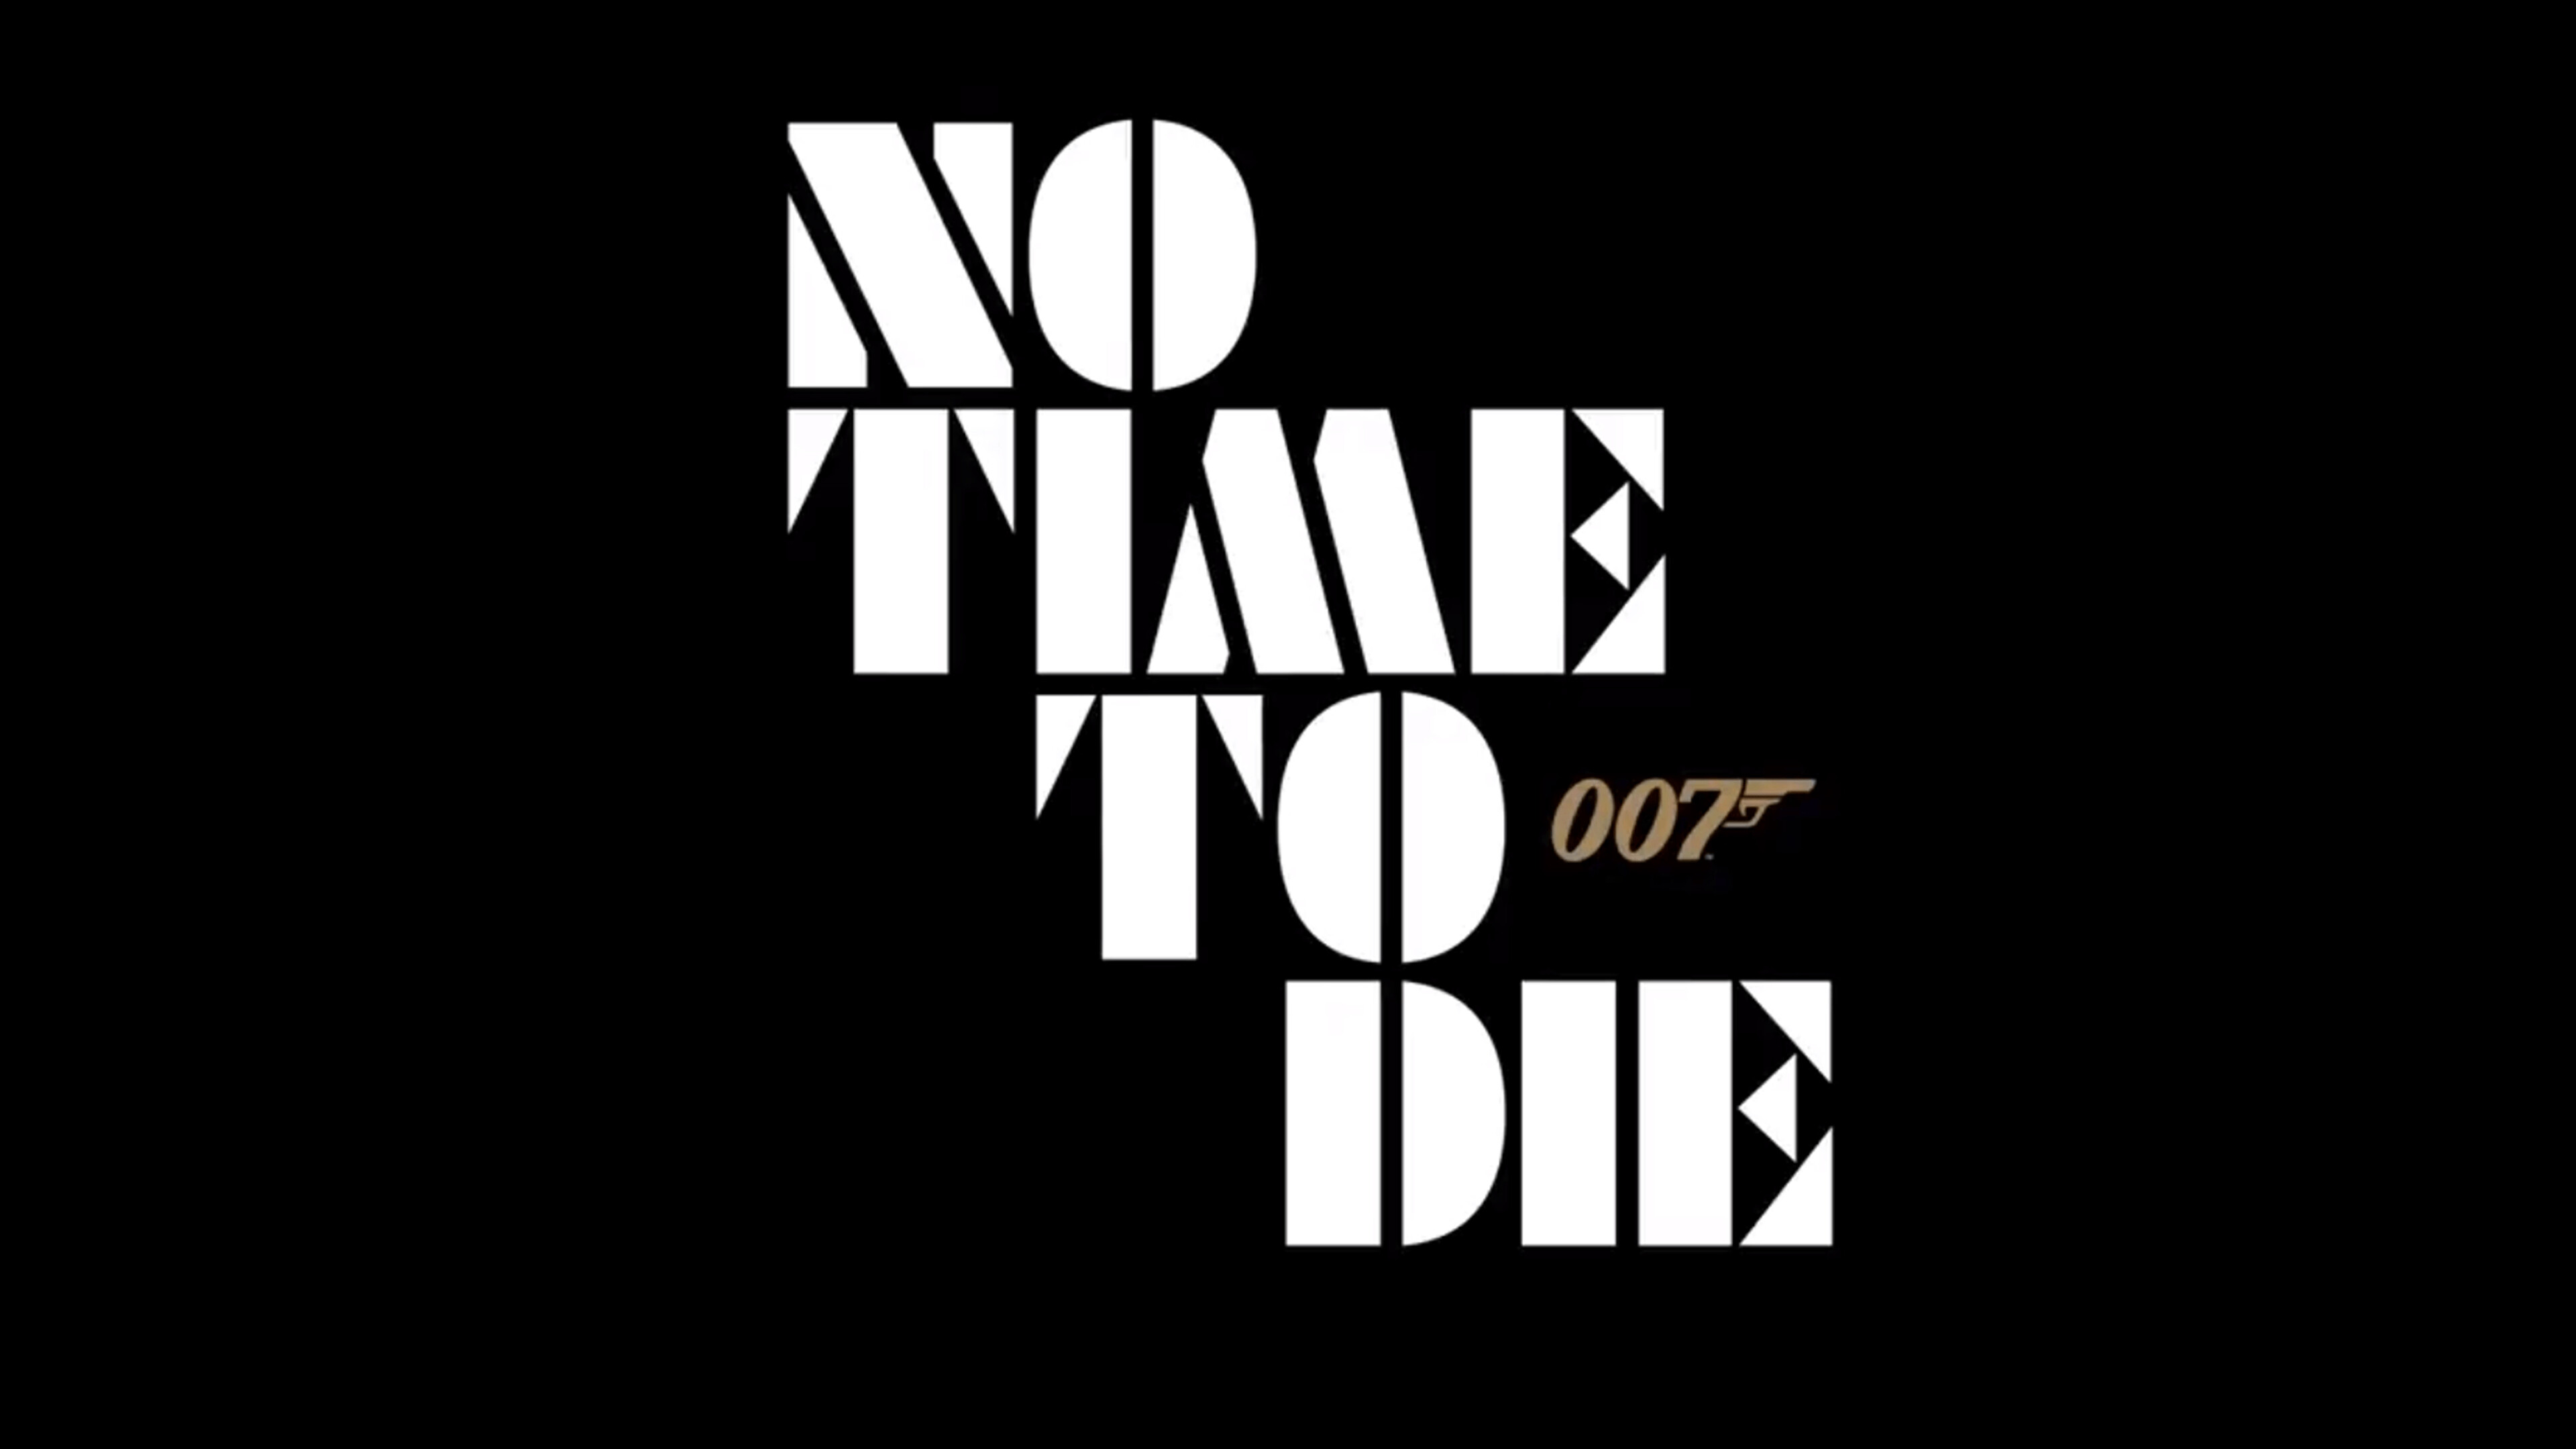 No Time to Die: The film starring Daniel Craig in his fifth and final portrayal of fictional British MI6 agent James Bond, Poster. 3840x2160 4K Background.